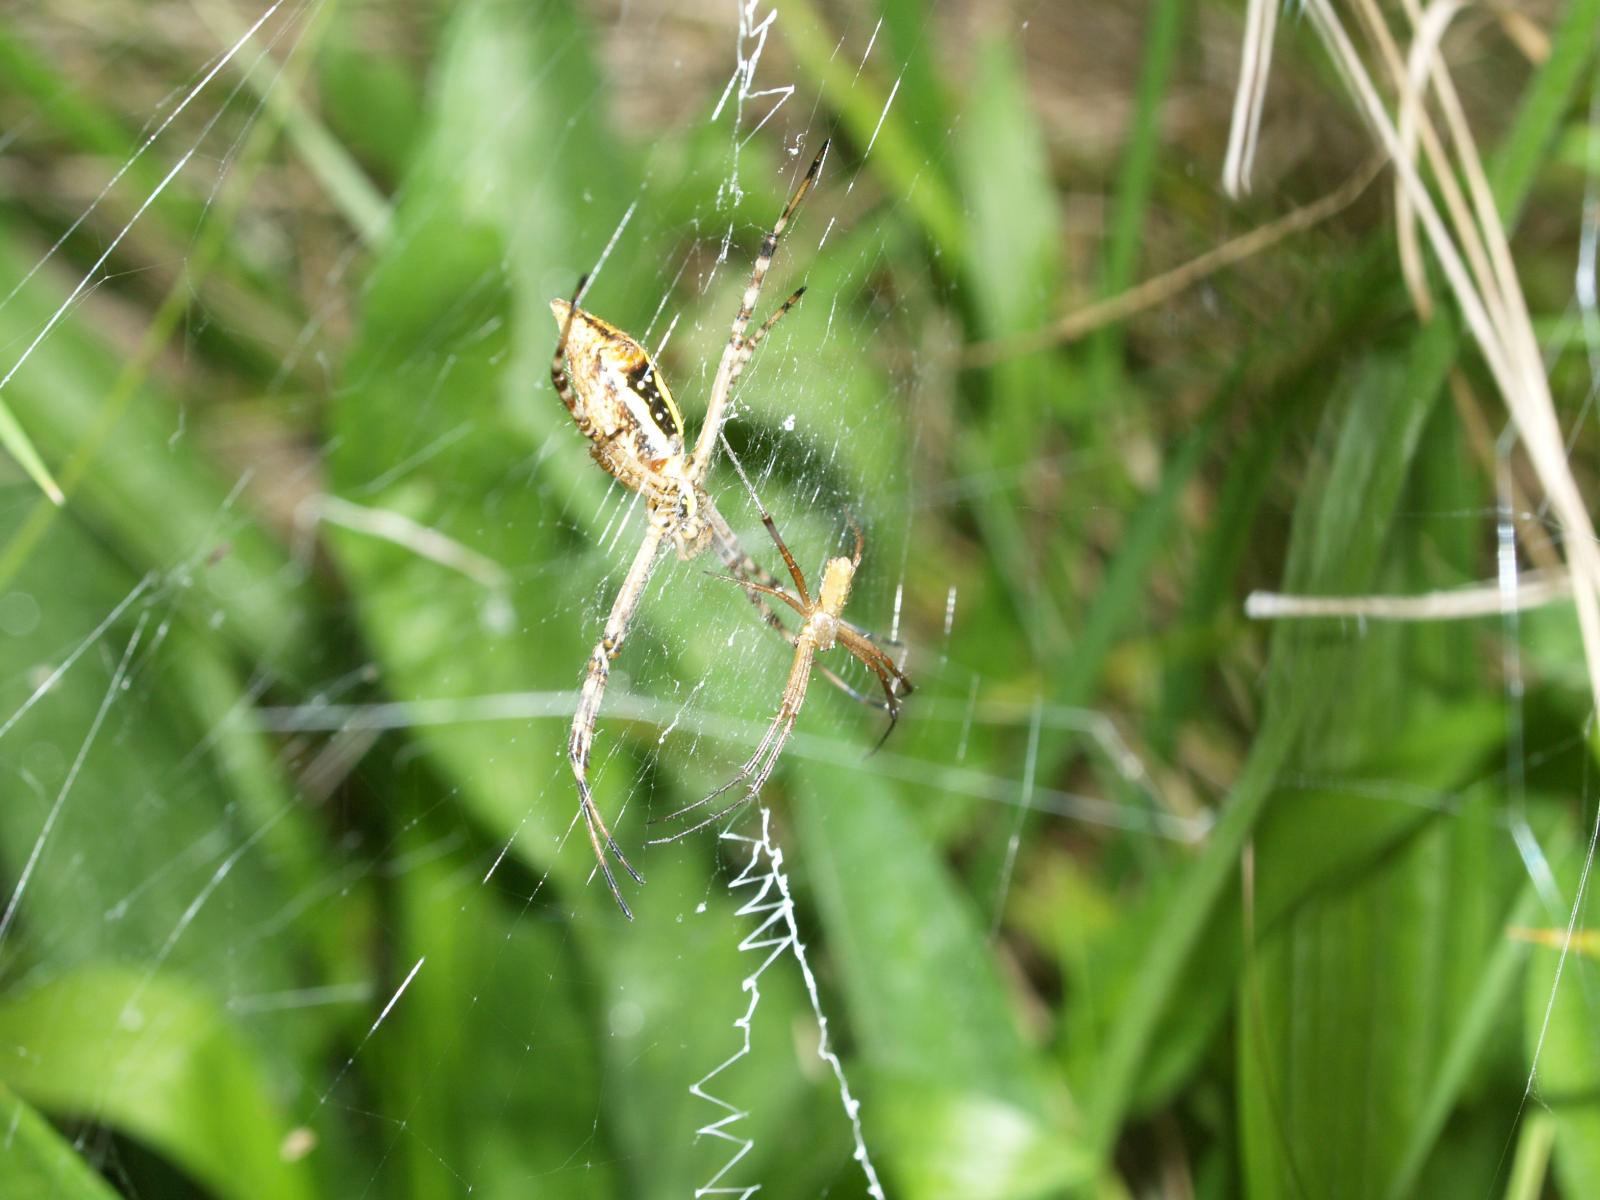 Orb spider on web showing large female and small male